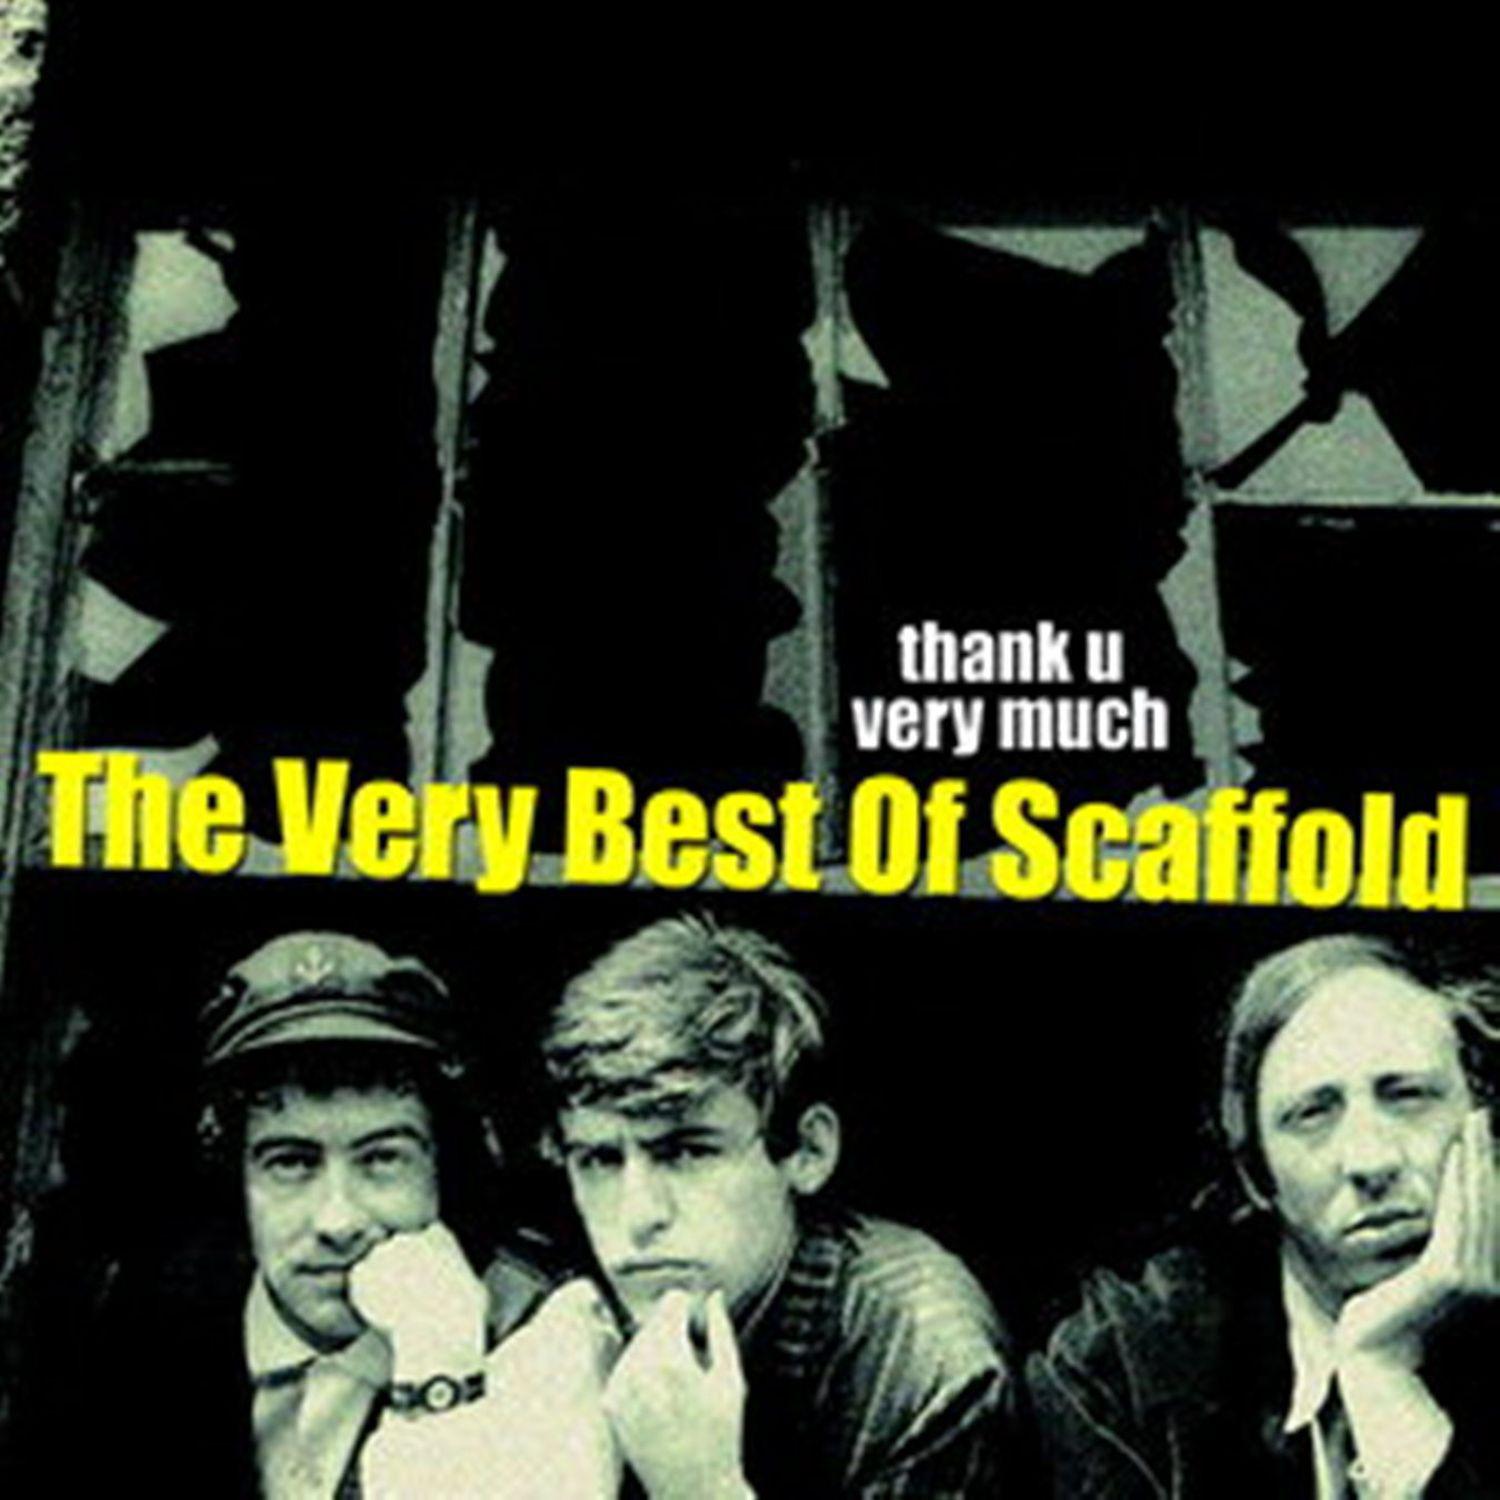 The Scaffold - Do You Remember